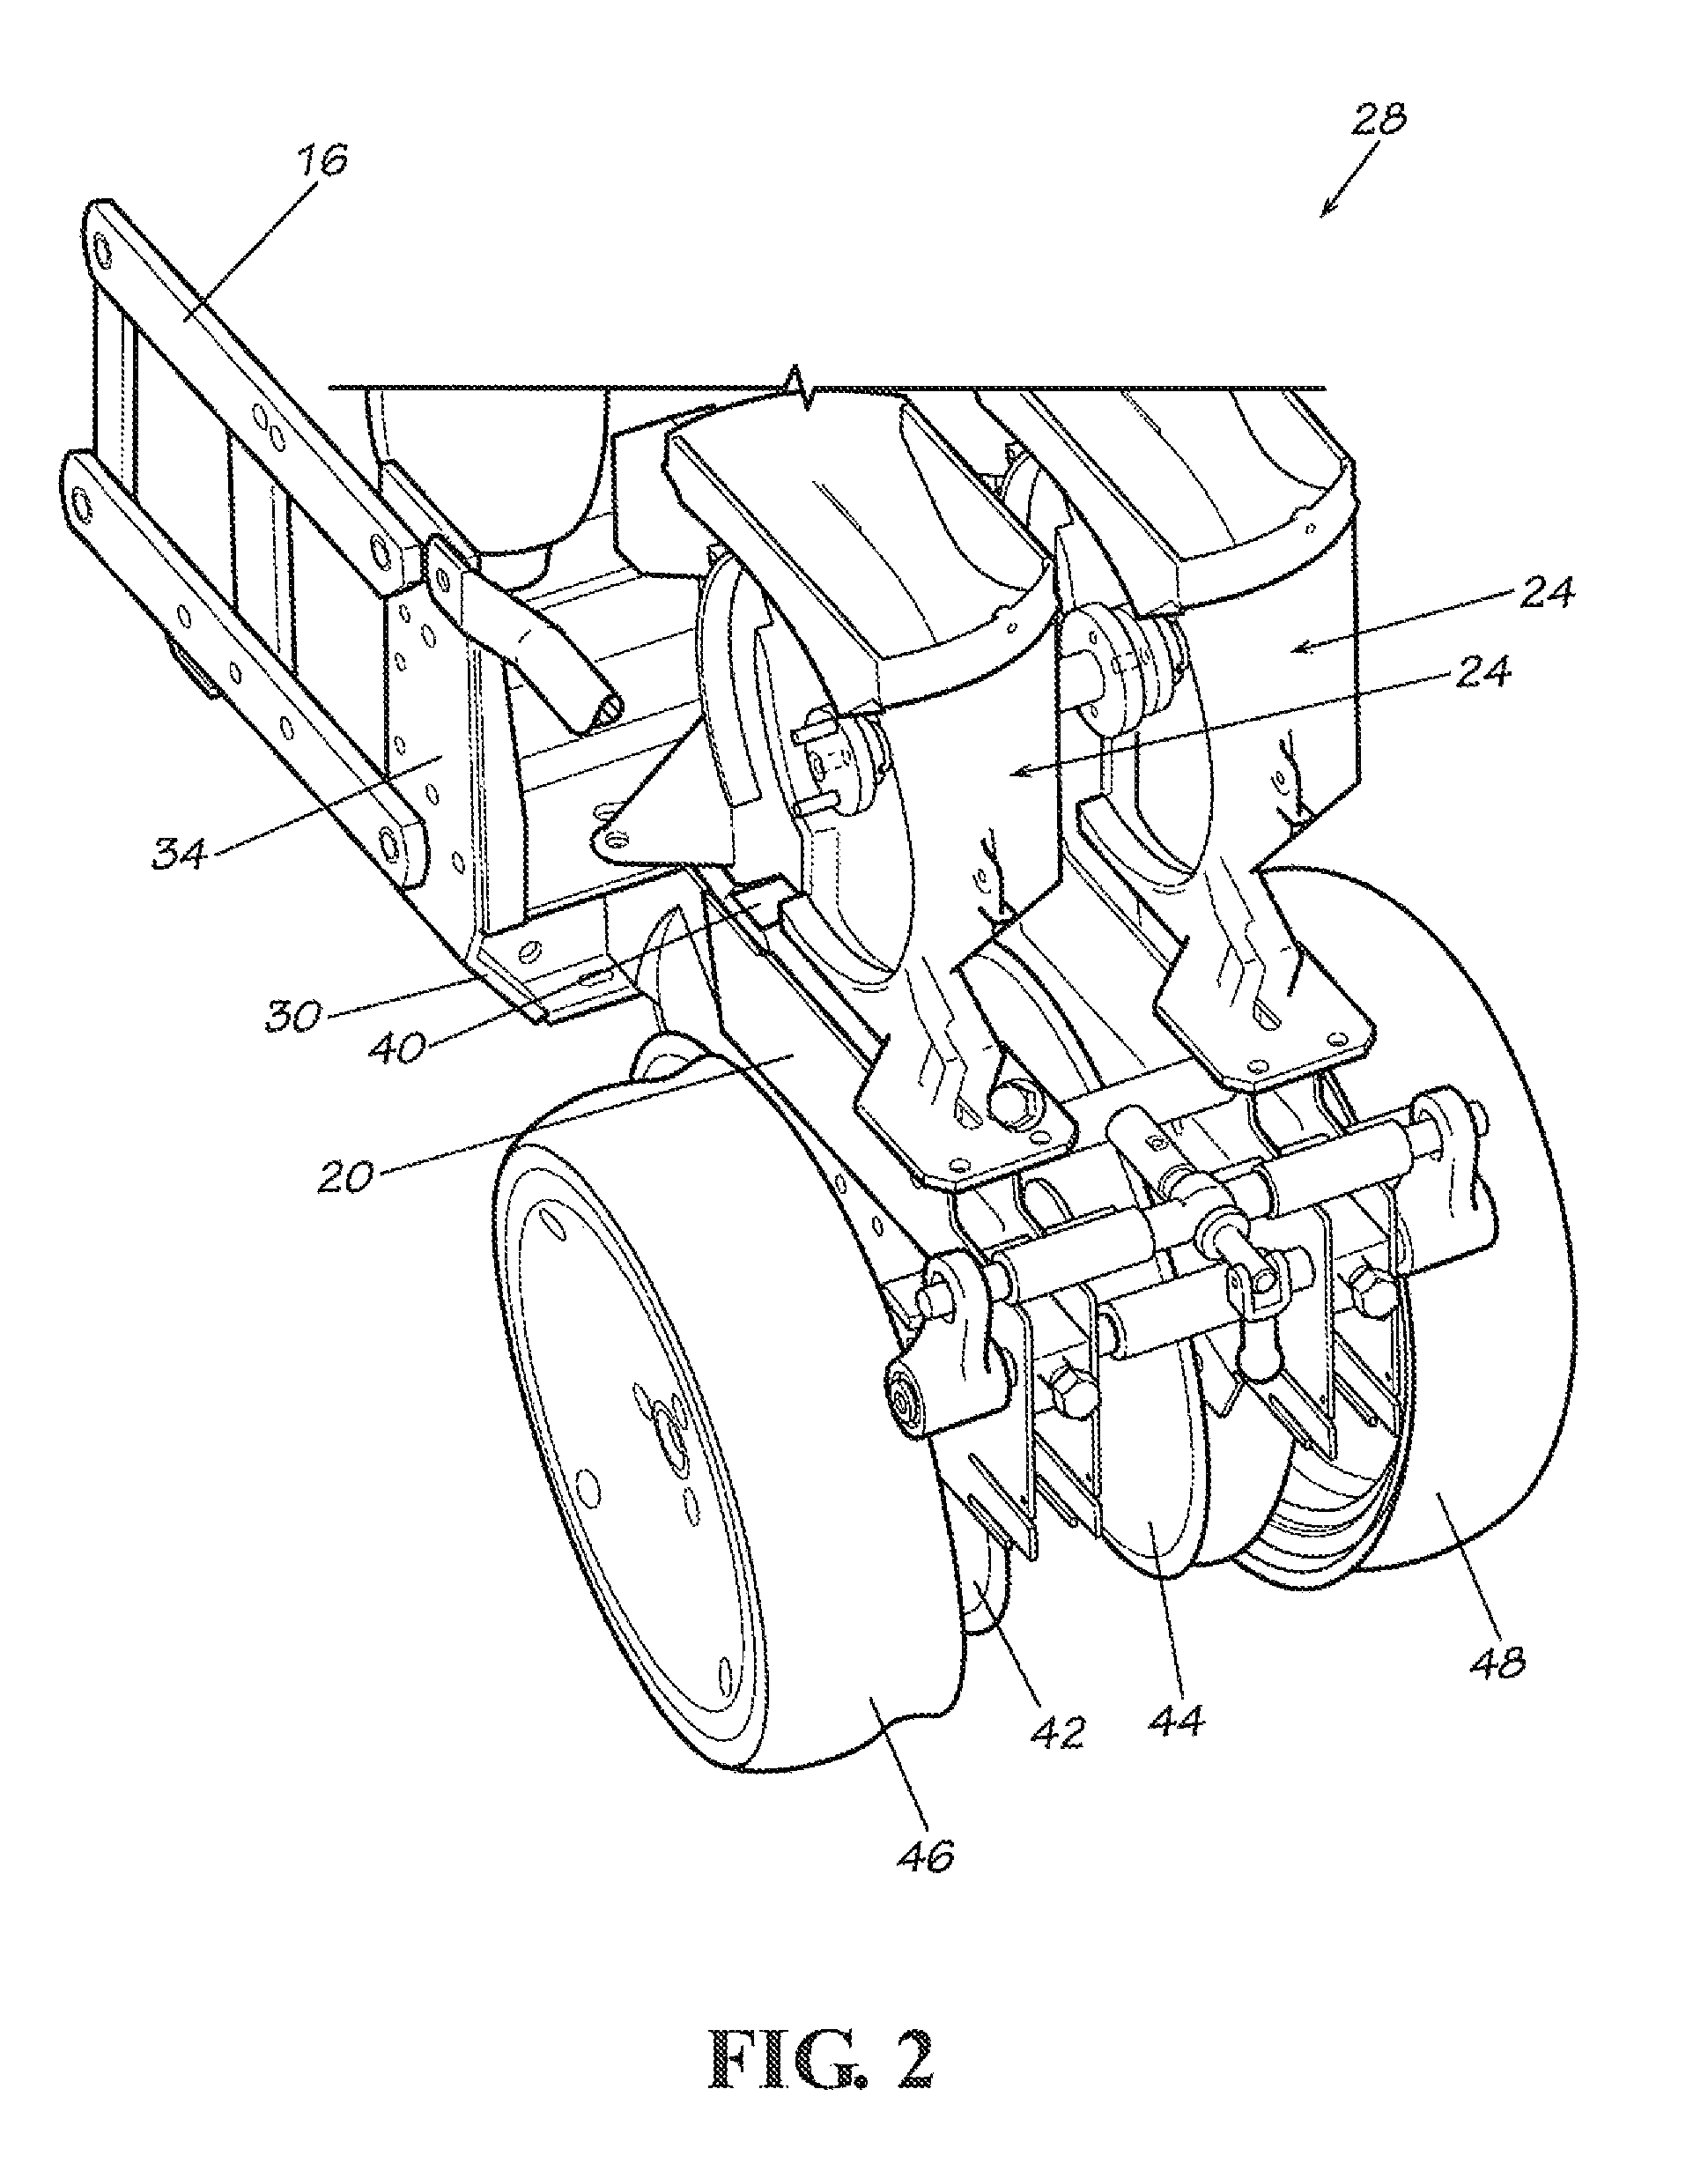 Dual product dispensing disk for metering device